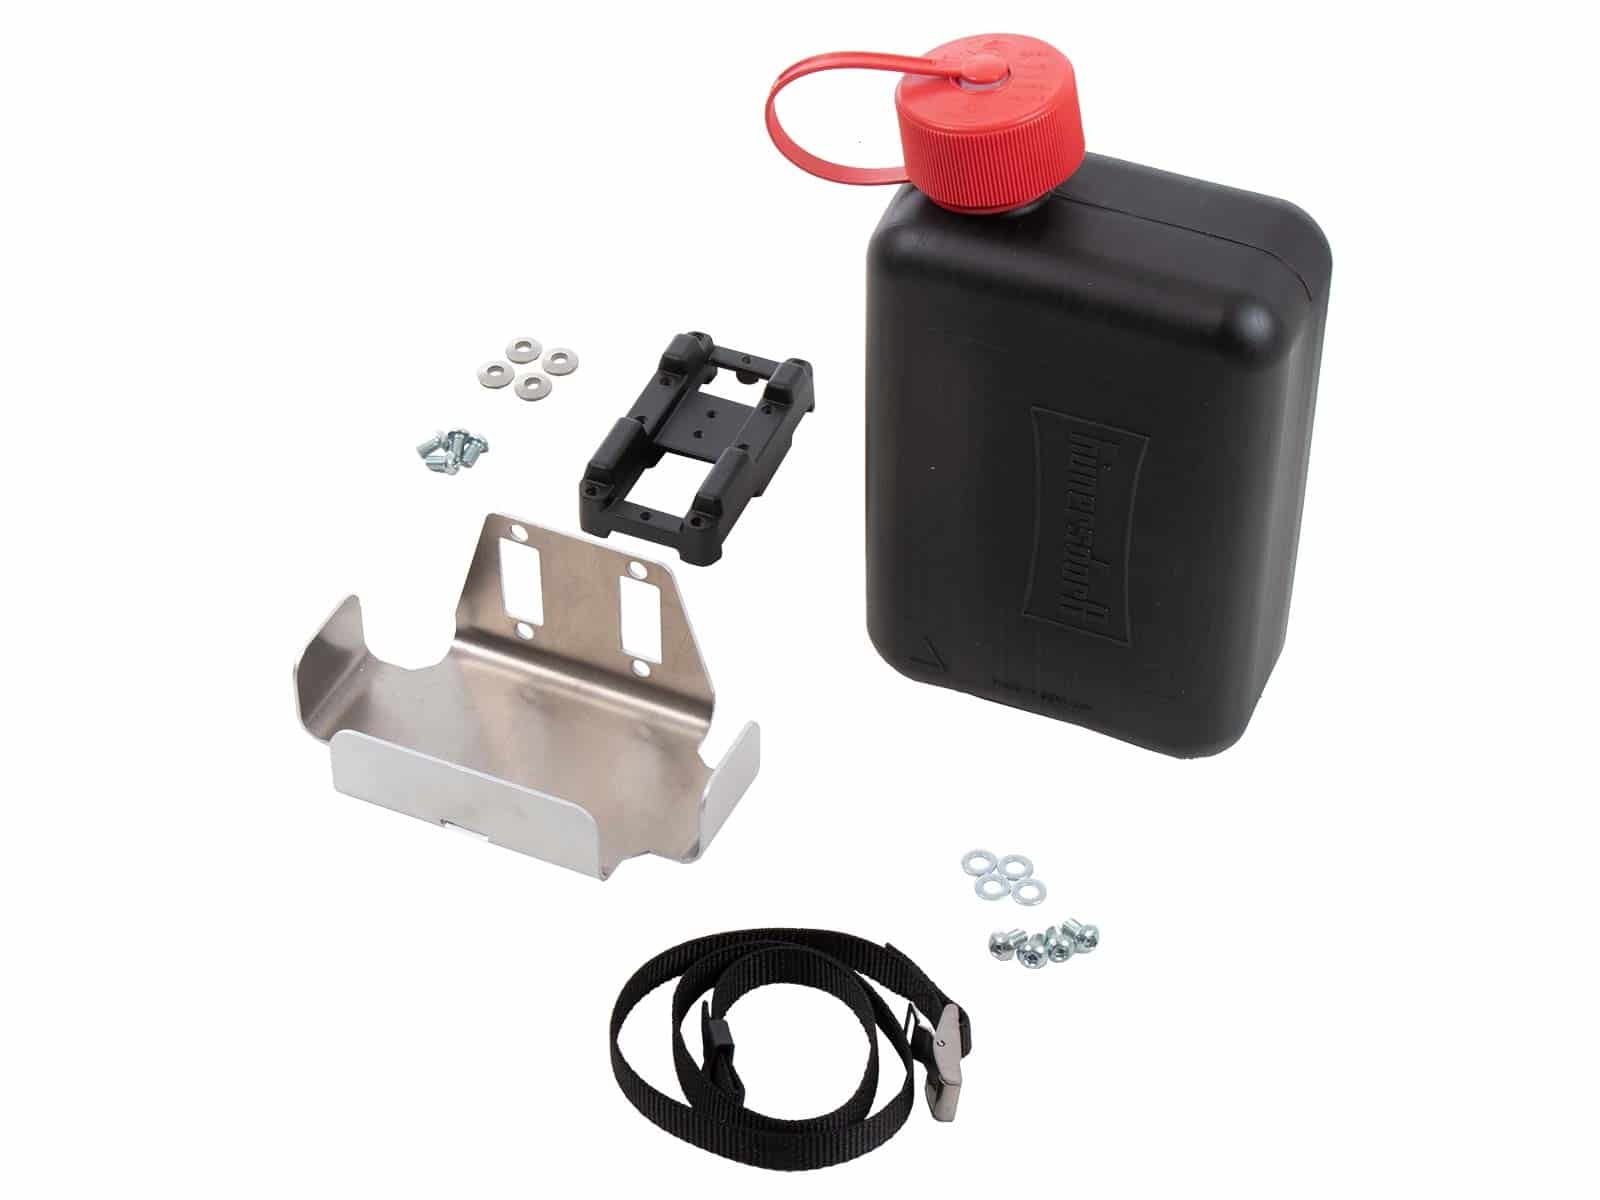 2 ltr. fuel canister incl. Universal bracket and mounting kit